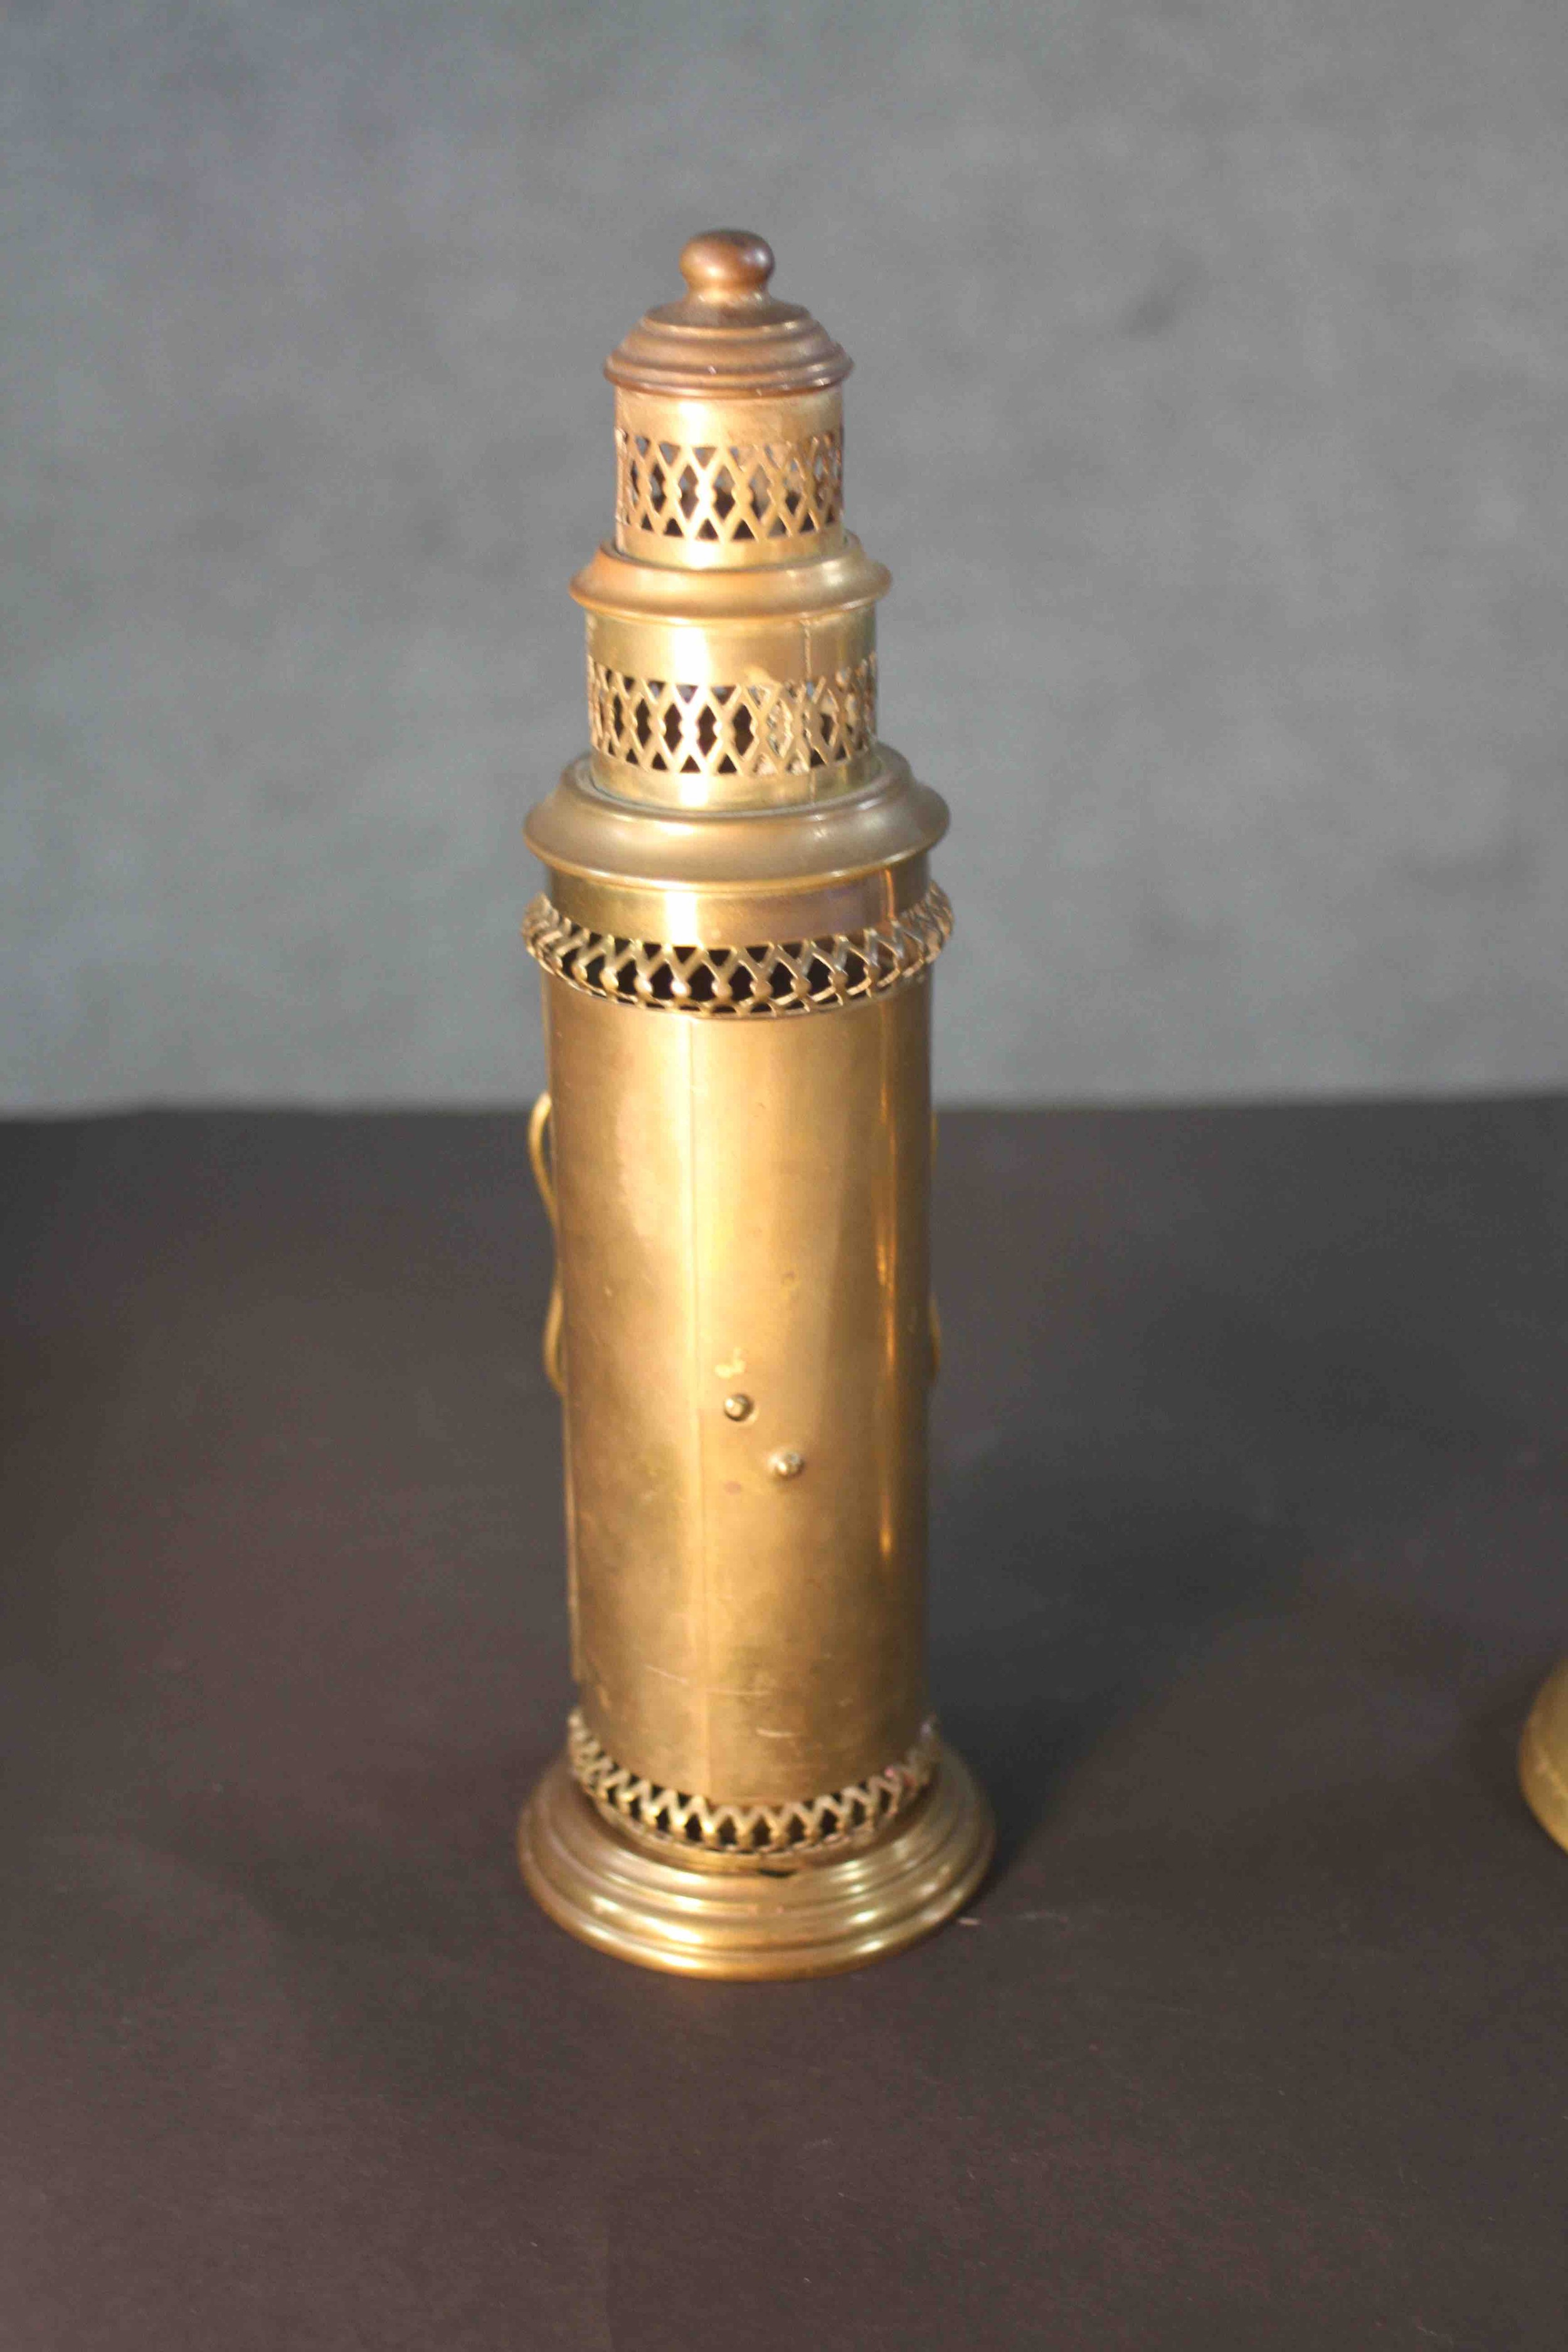 A pair of early 20th century brass candlesticks along with a portable brass candlestick lantern with - Image 4 of 8